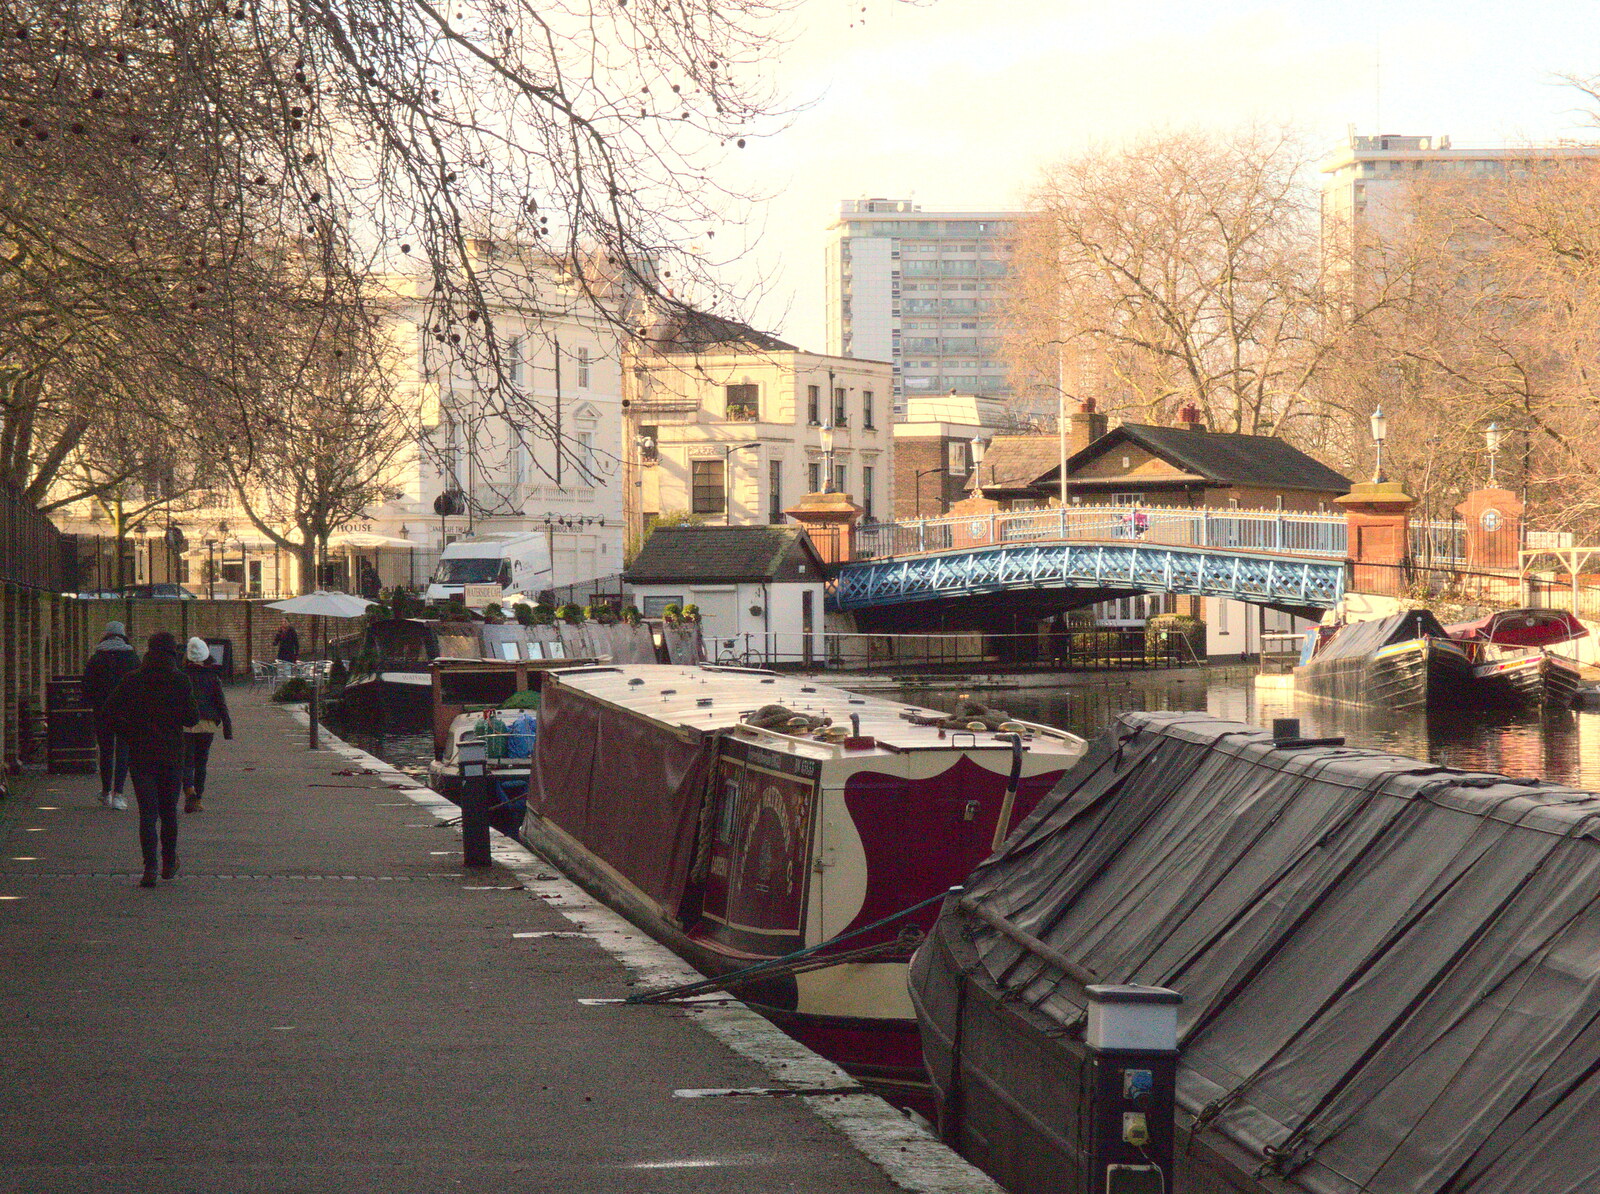 The area optimistically known as Little Venice from Little Venice and Diss Park, West London and Norfolk - 17th February 2017